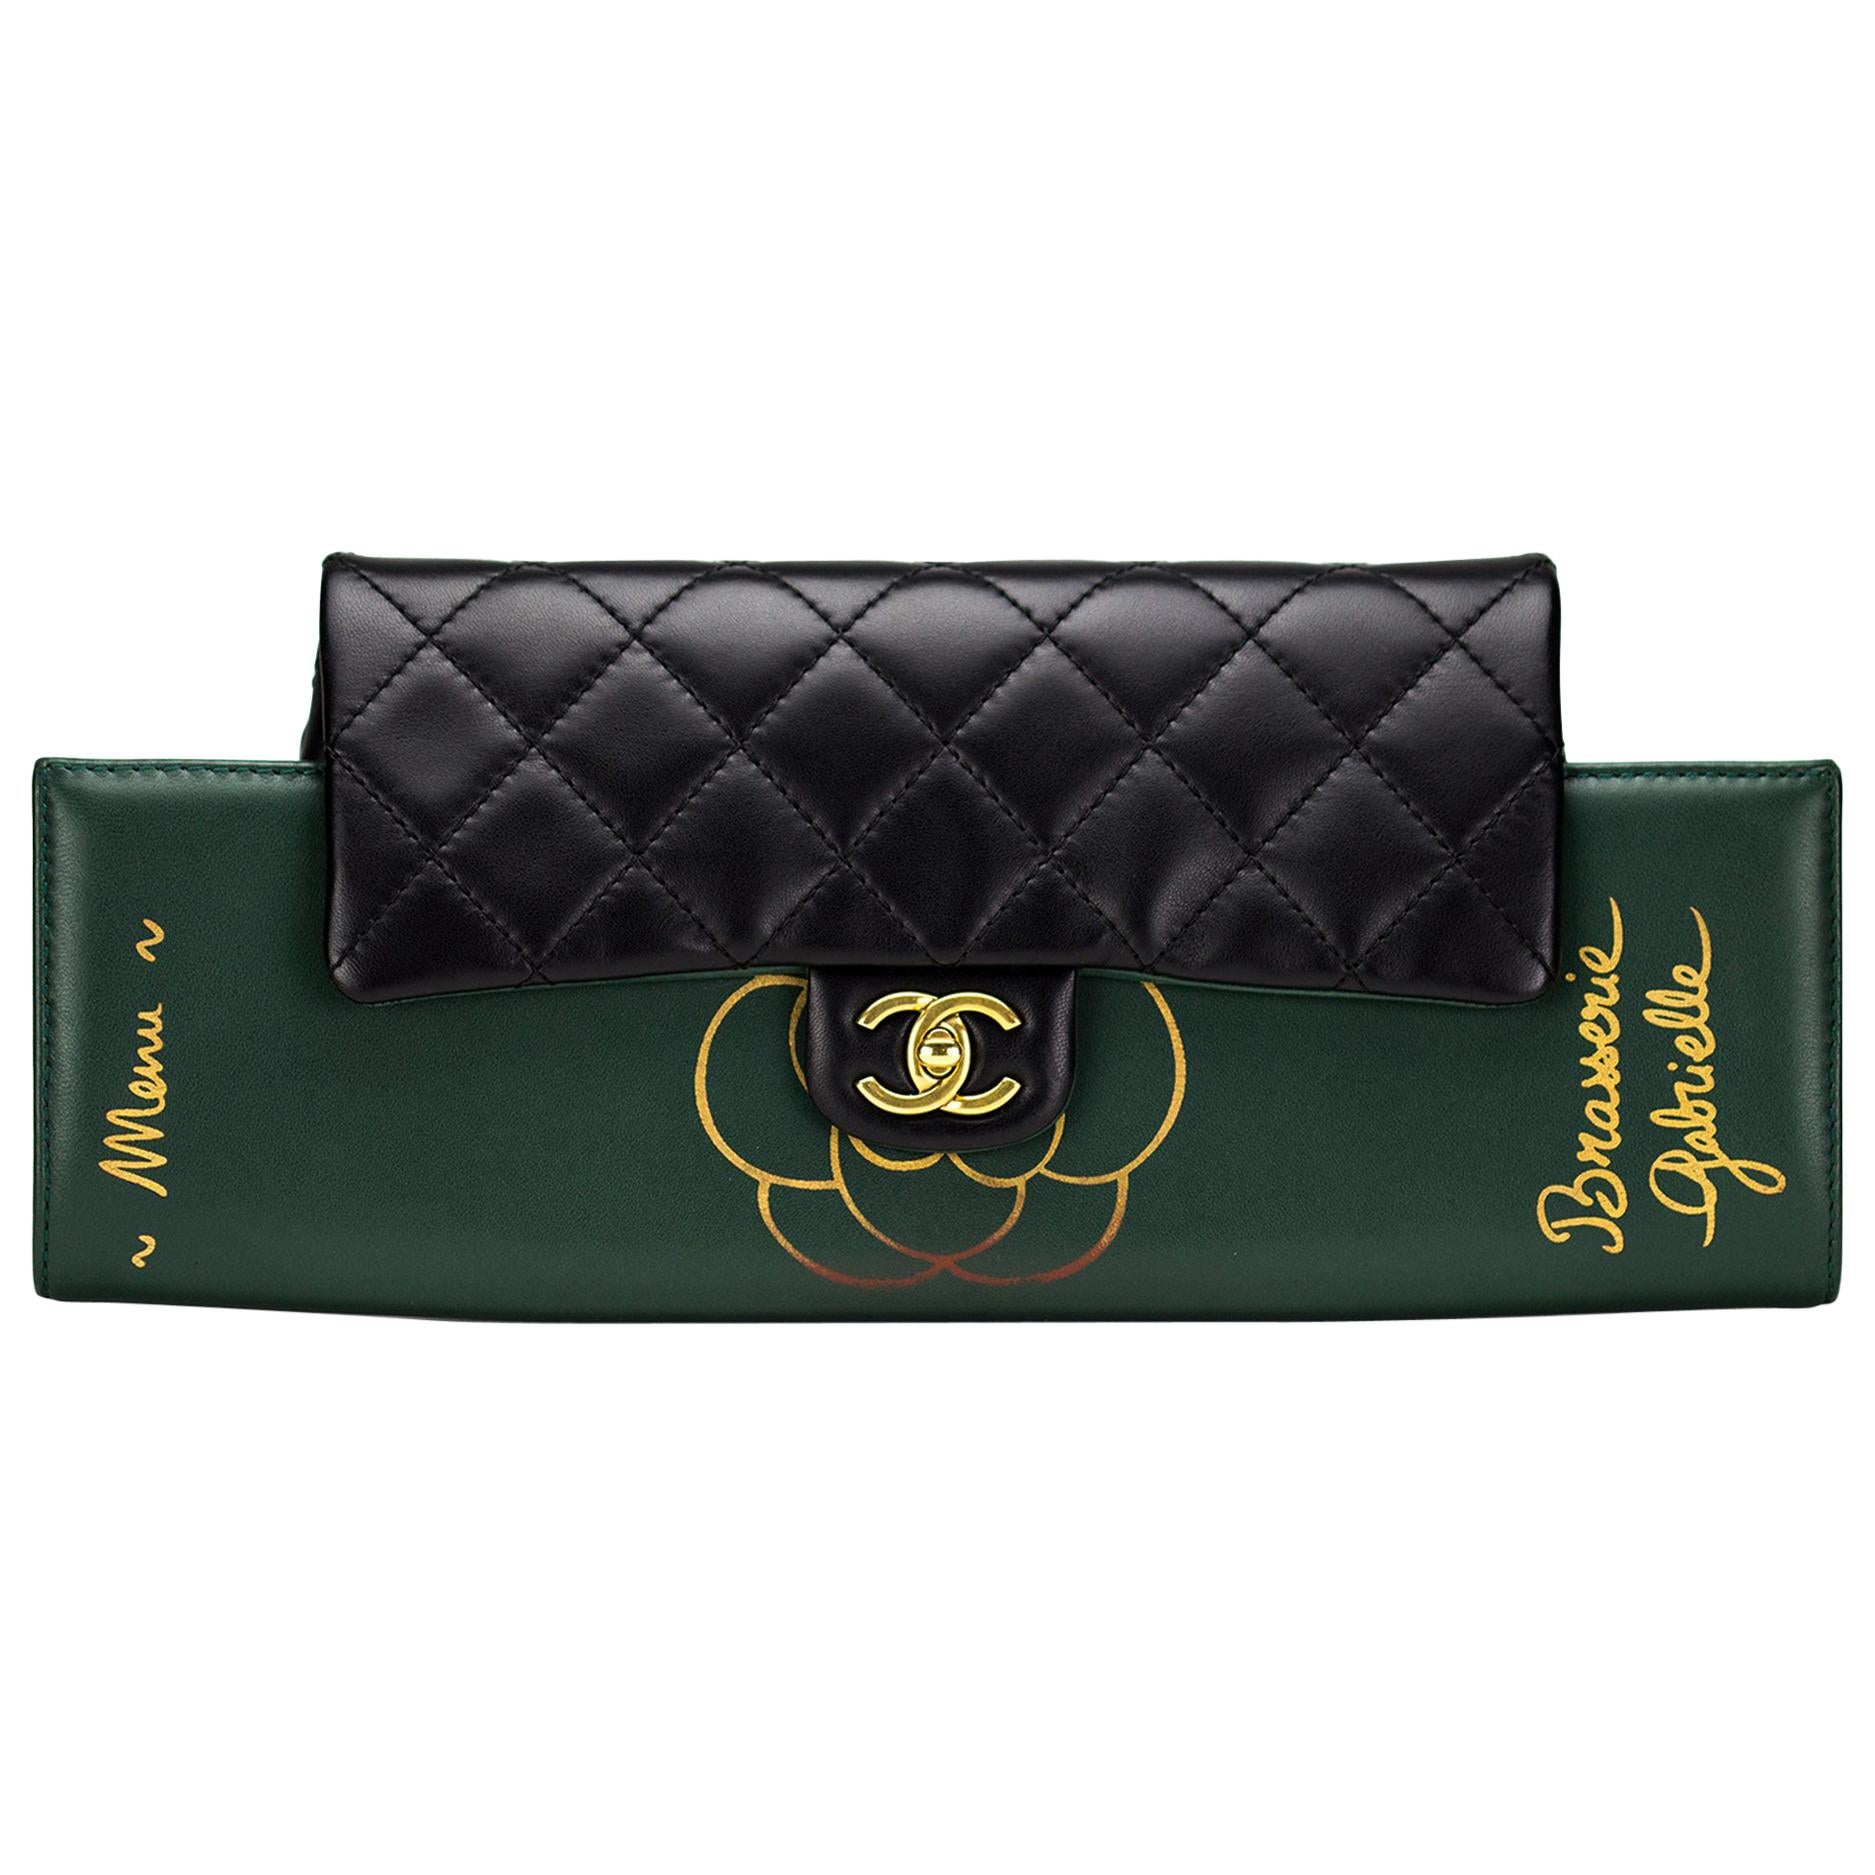 Green calfskin and quilted diamond stitch Chanel Menu clutch flap

Year: 2015
Gold hardware
Classic interlocking cc clasp
Interior large pocket
Two additional interior pockets
Interwoven chain
Can be carried as a flap or clutch
6.5” H x 15” W x 2”